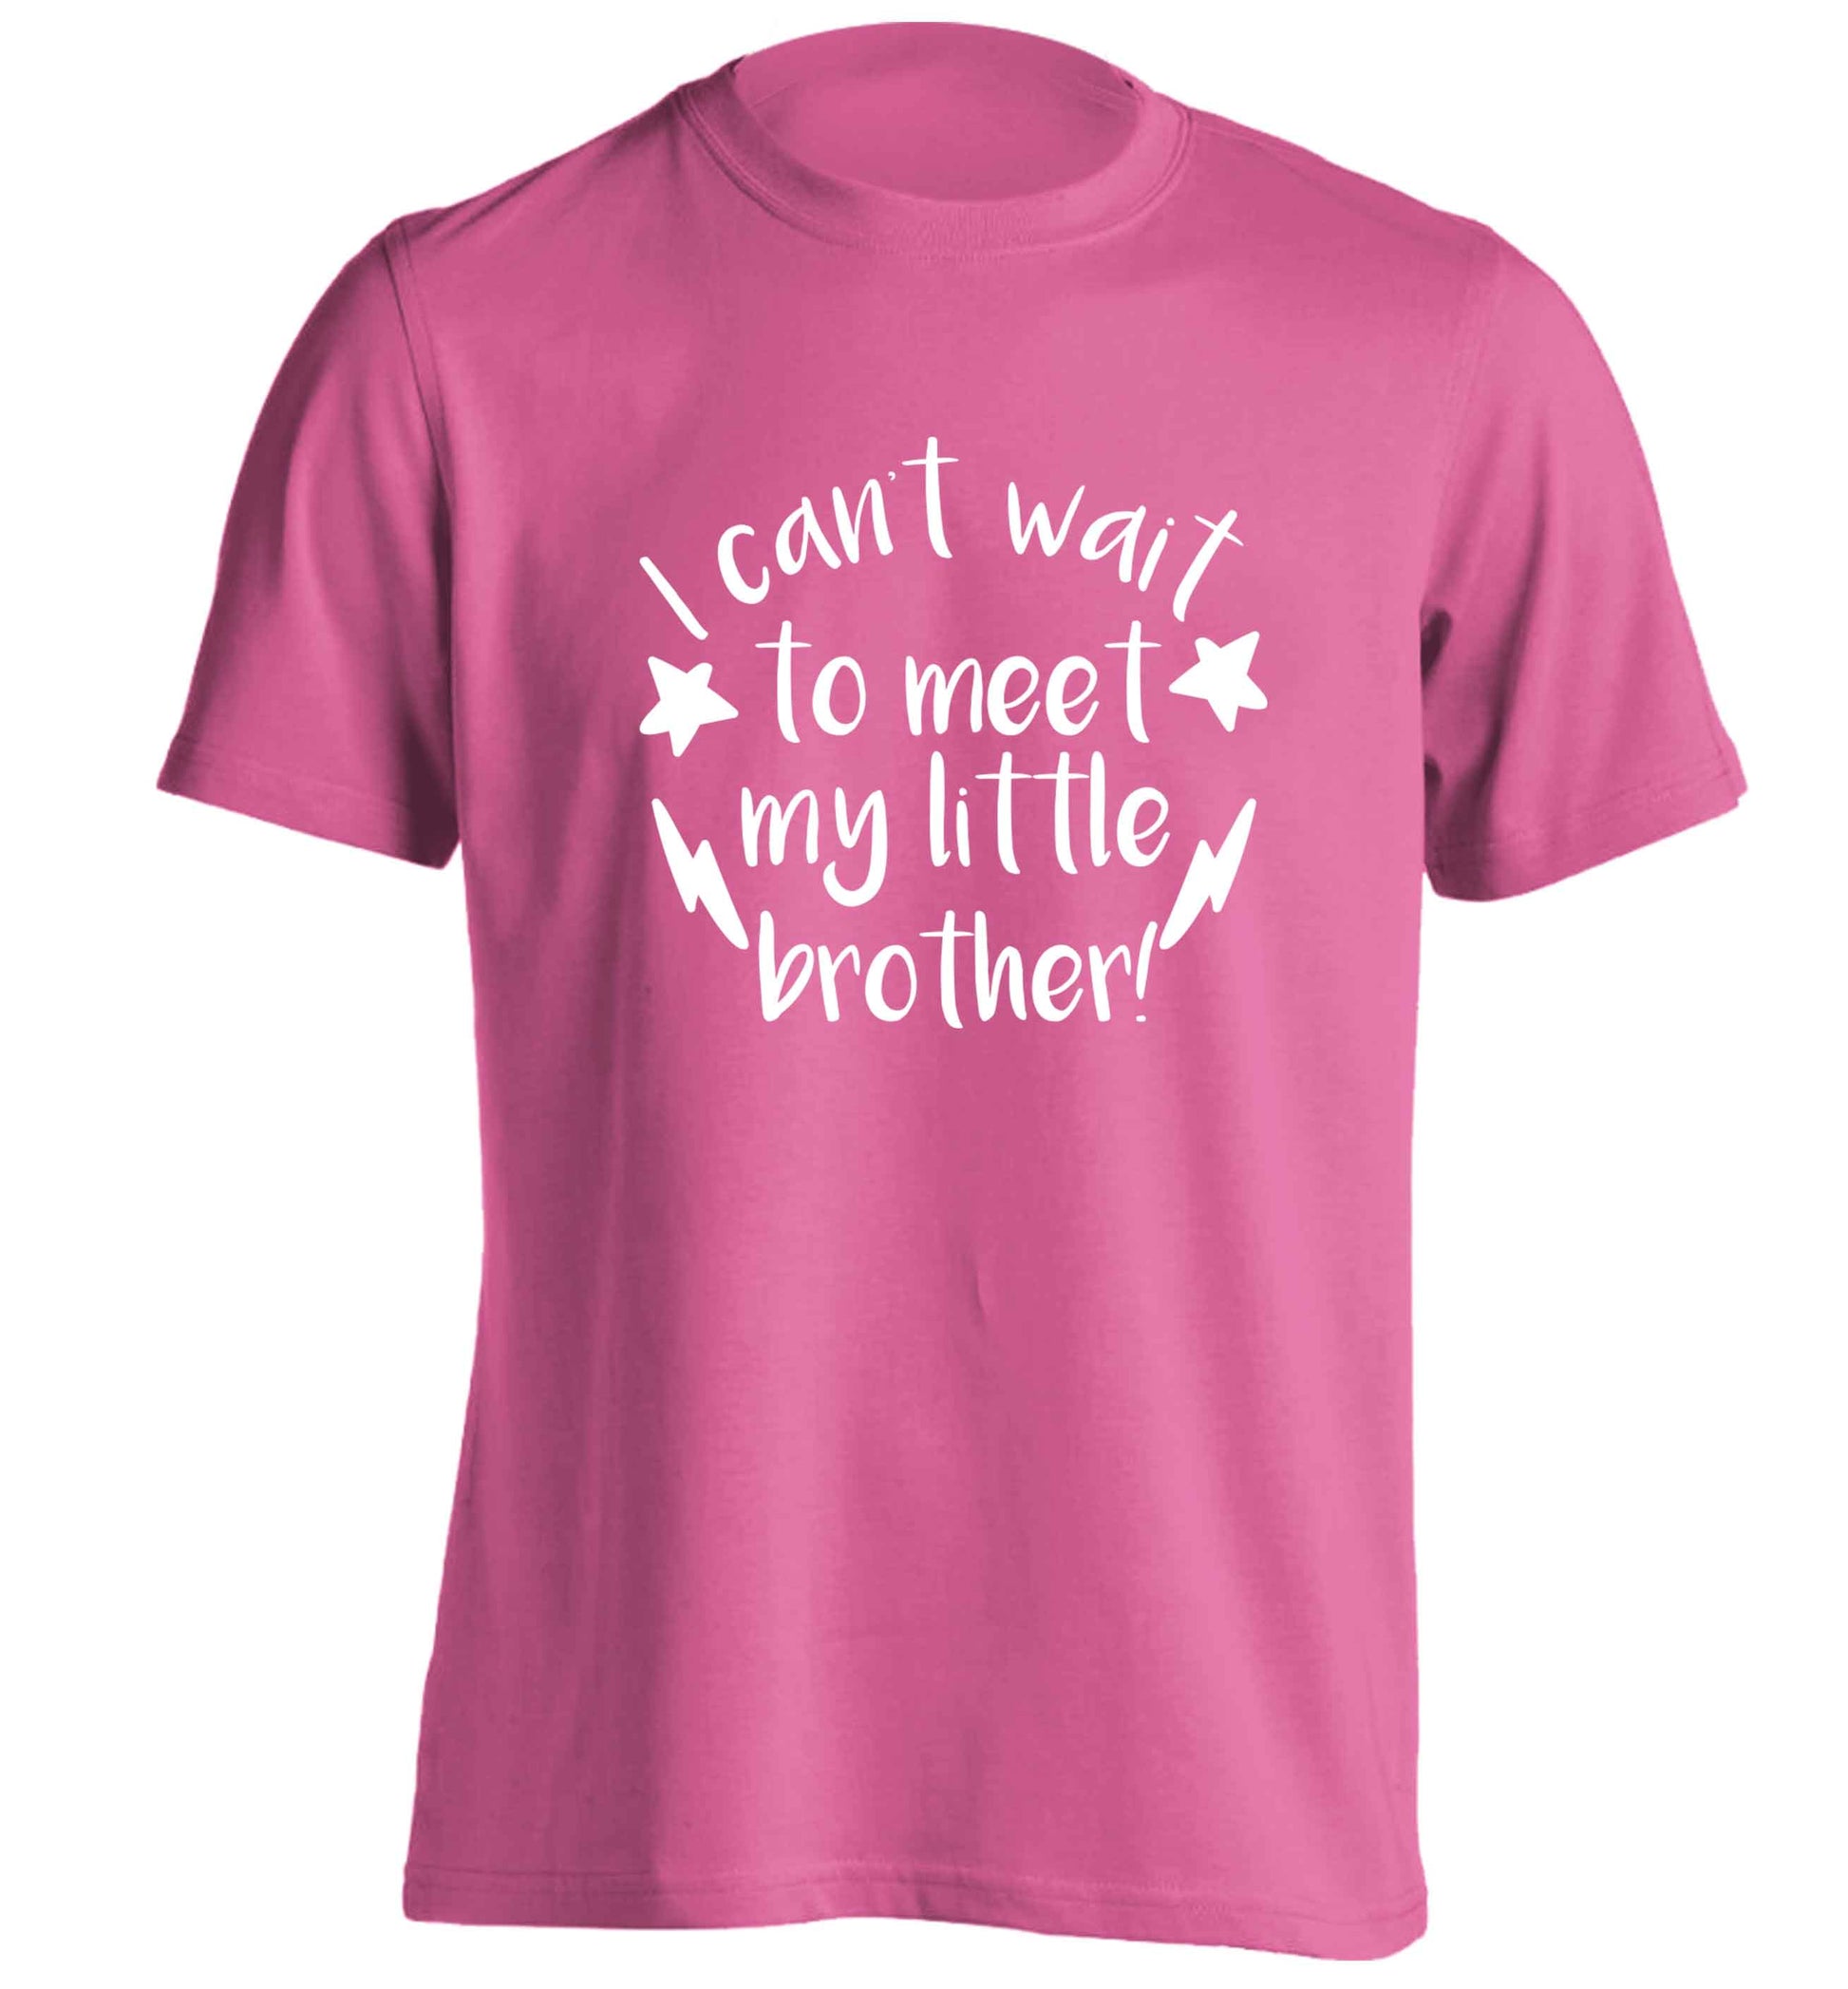 I can't wait to meet my sister! adults unisex pink Tshirt 2XL